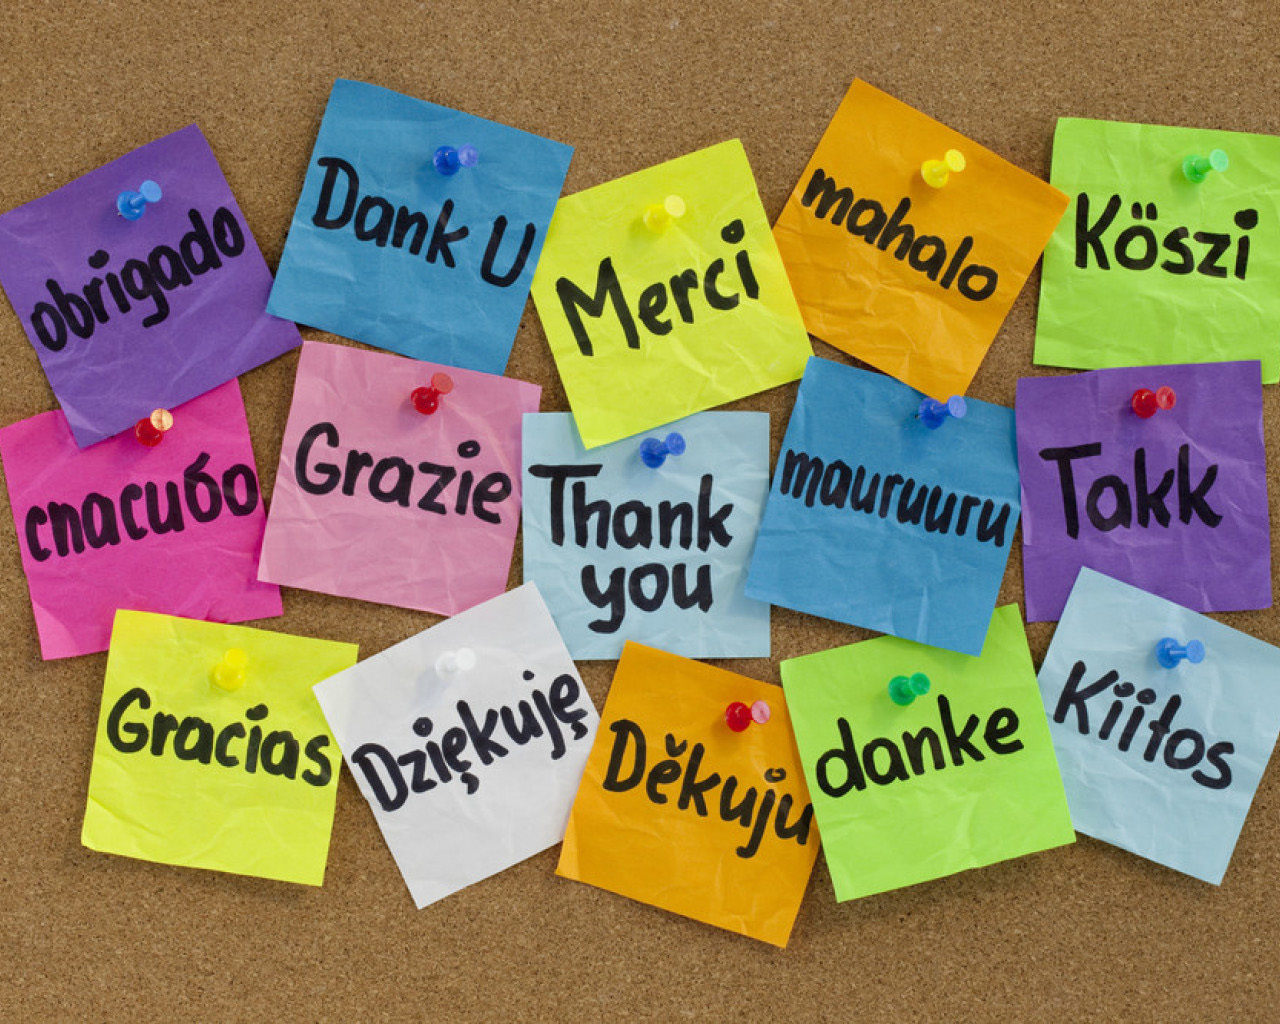 Das How To Say Thank You in Different Languages Wallpaper 1280x1024